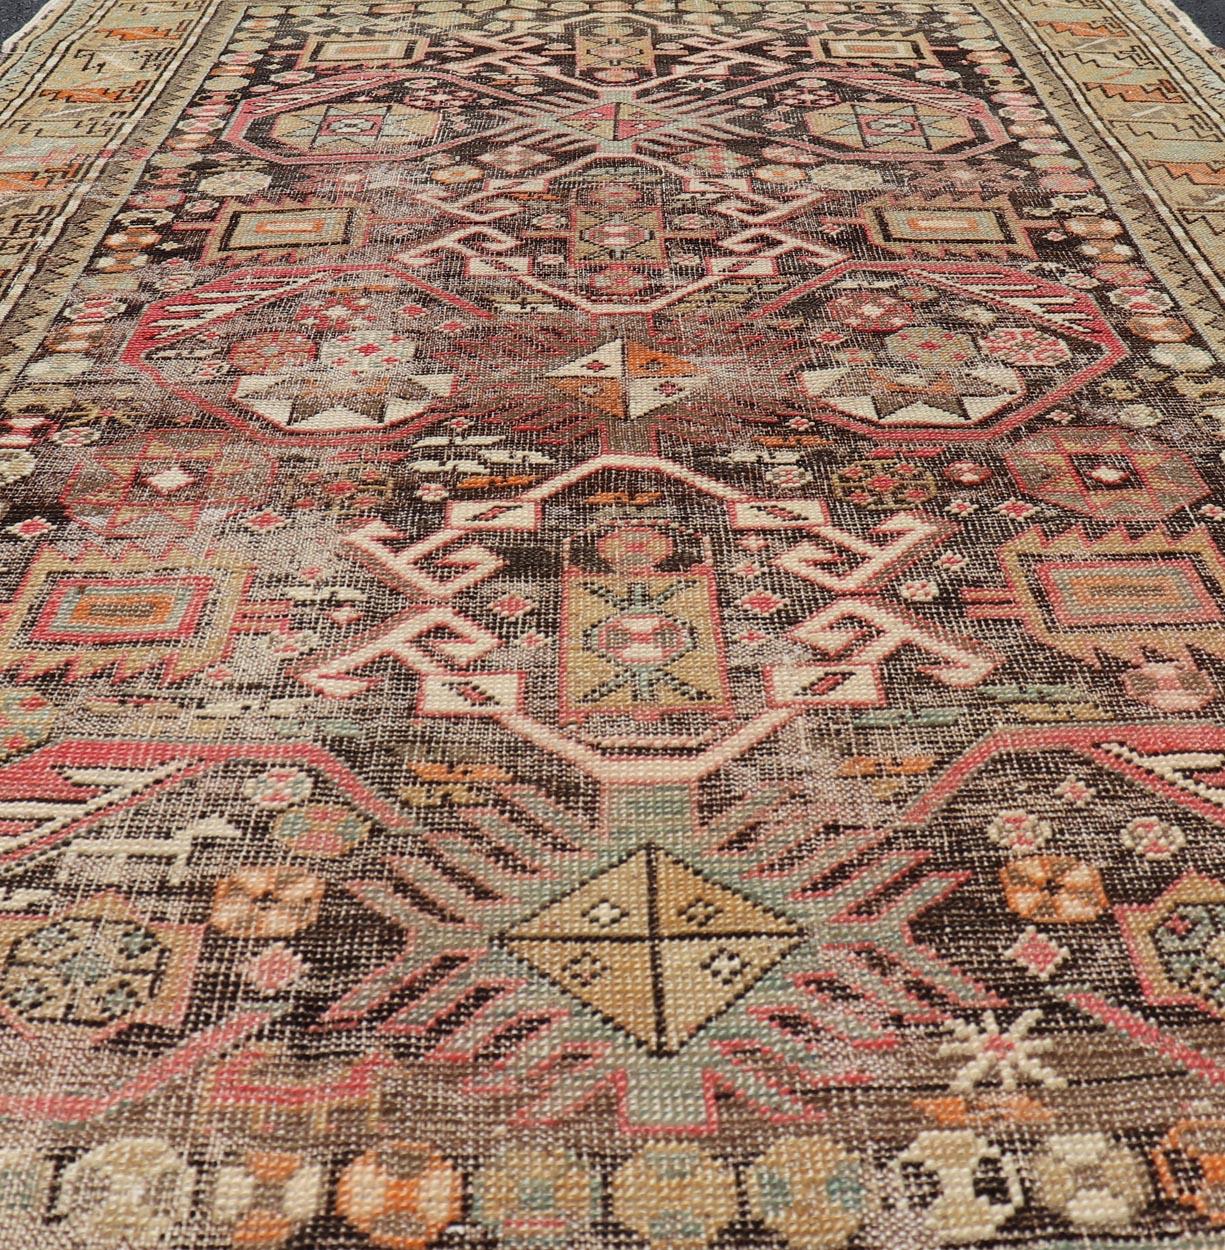 Antique Caucasian Shirvan Rug with All-Over Floral Motifs On A Brown Field. Keivan Woven Arts, Rug EMB-22185-15066, Antique Caucasian, Antique Shirvan Caucasus Early 20th Century
Measures: 3'3 x 5'2 
This colorful blossom Shirvan carpet features an